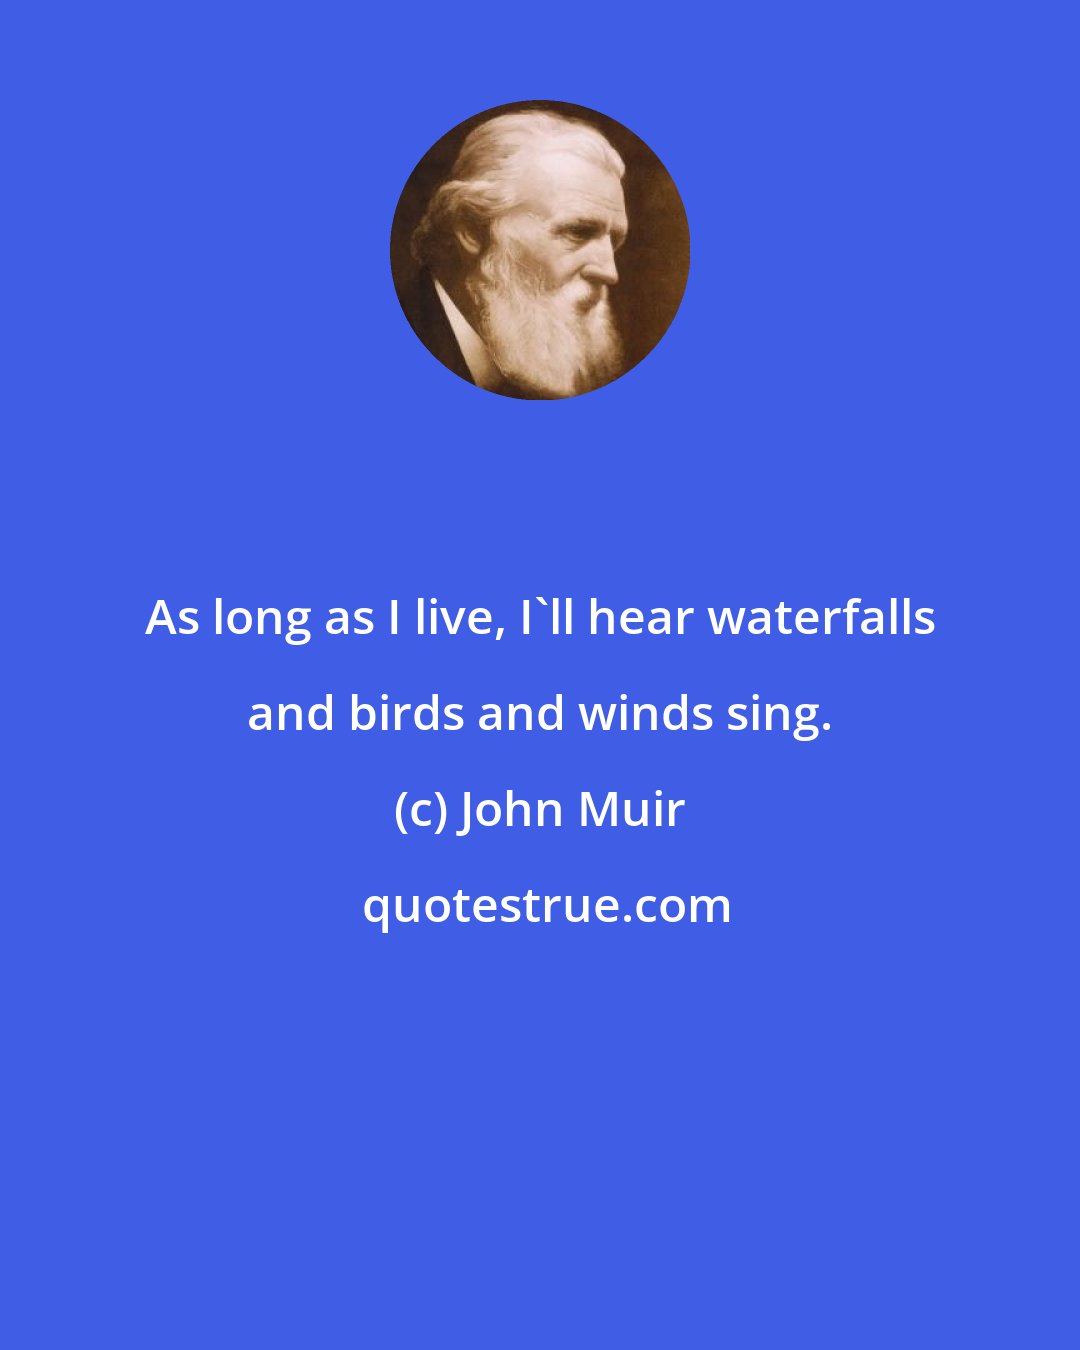 John Muir: As long as I live, I'll hear waterfalls and birds and winds sing.